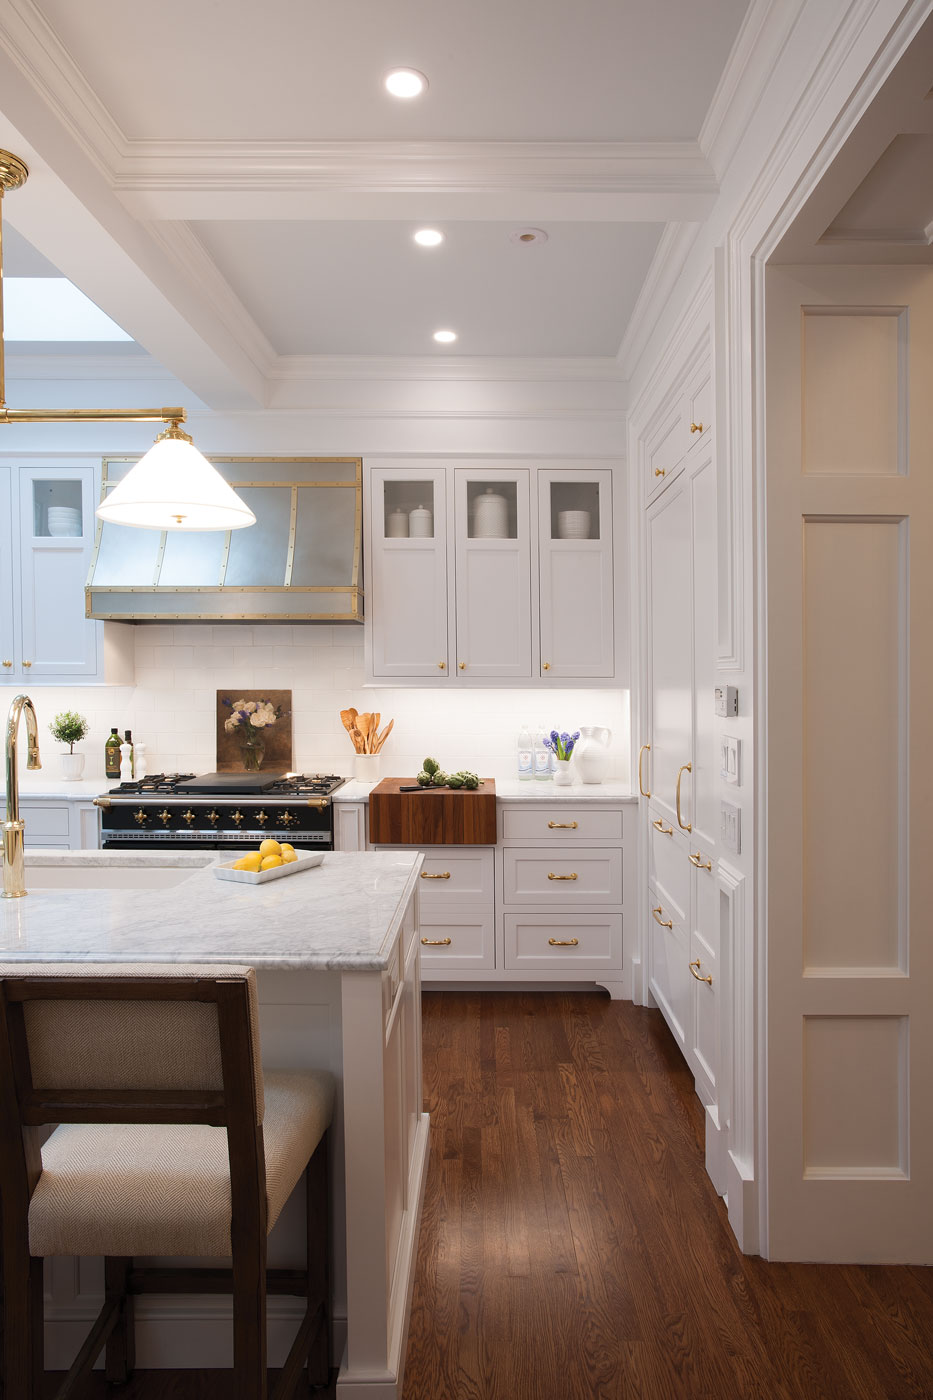 High-end inset custom cabinetry by Crown Point Cabinetry